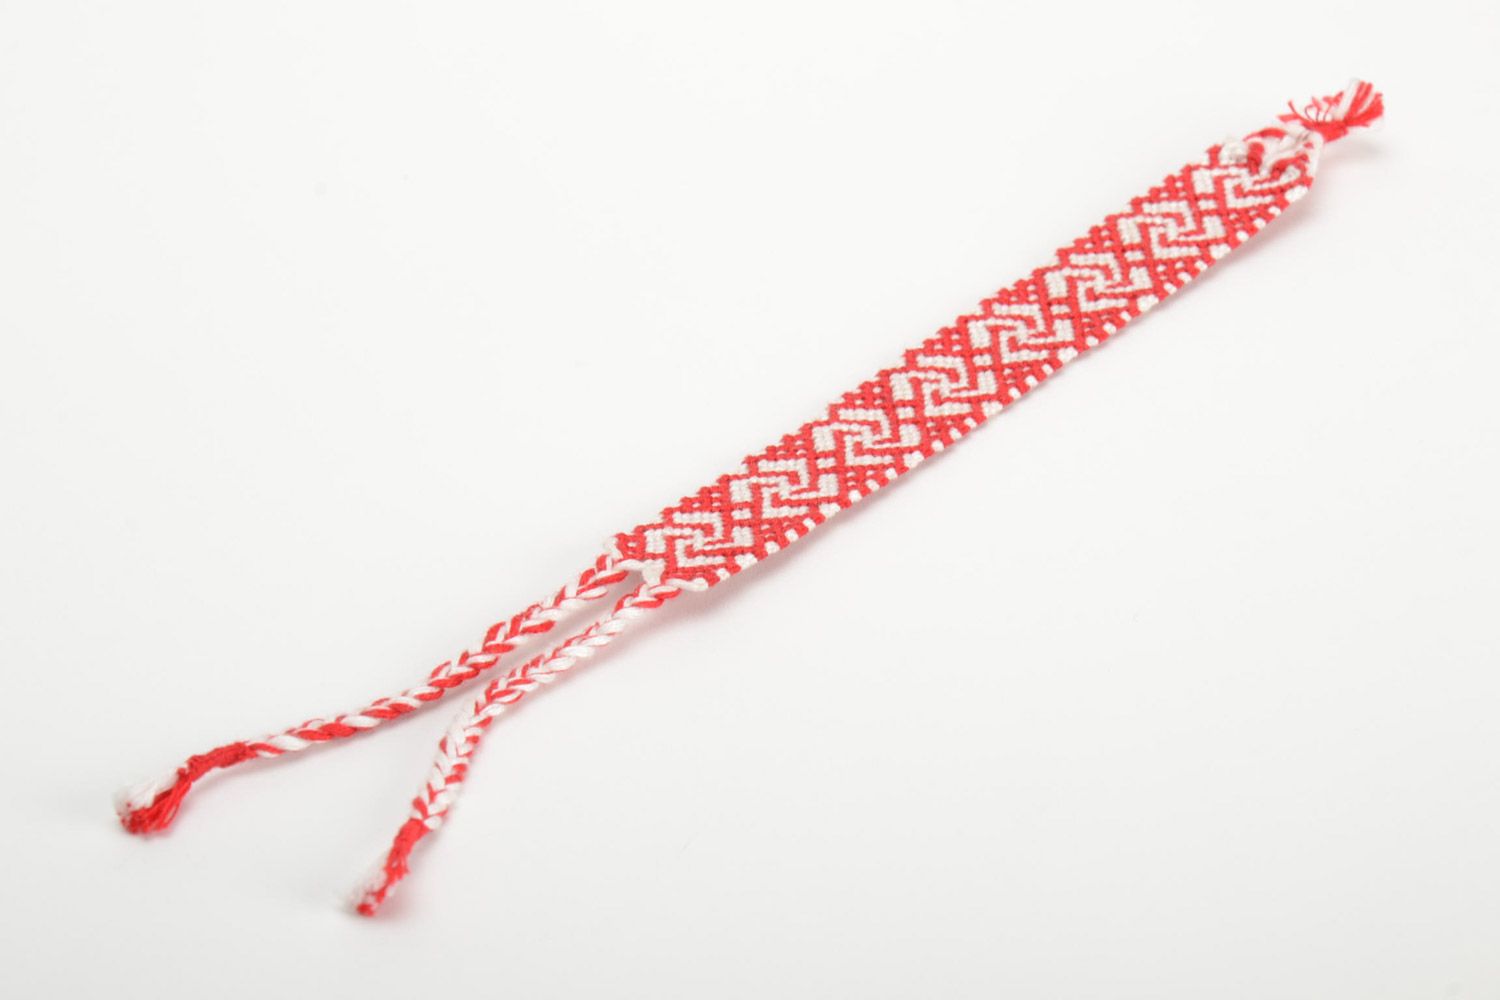 Handmade ethnic friendship wrist bracelet woven of red and white threads photo 2